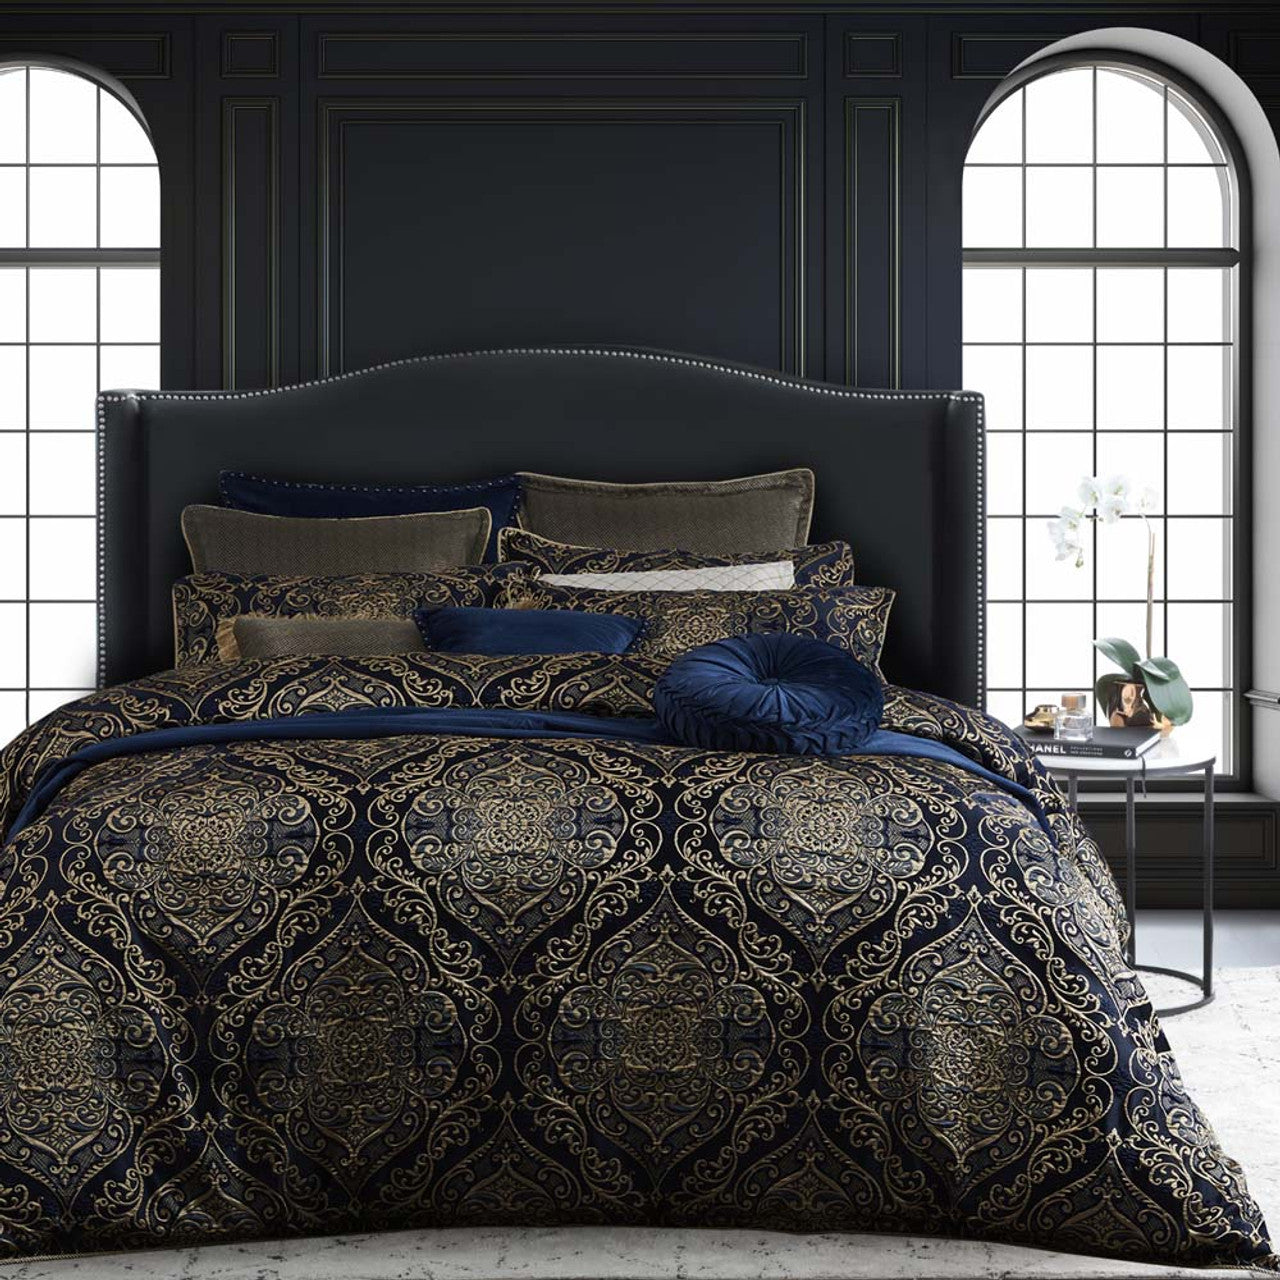 Experience the allure and grandeur of French Rococo design with the Davinci Peron Night Bed Quilt Cover Set. This exquisite ensemble pays homage to the decadence and drama of the era. The formal and symmetrical composition showcases large ornamental motifs enriched with metallic gold threads, set against a deep navy ground. 